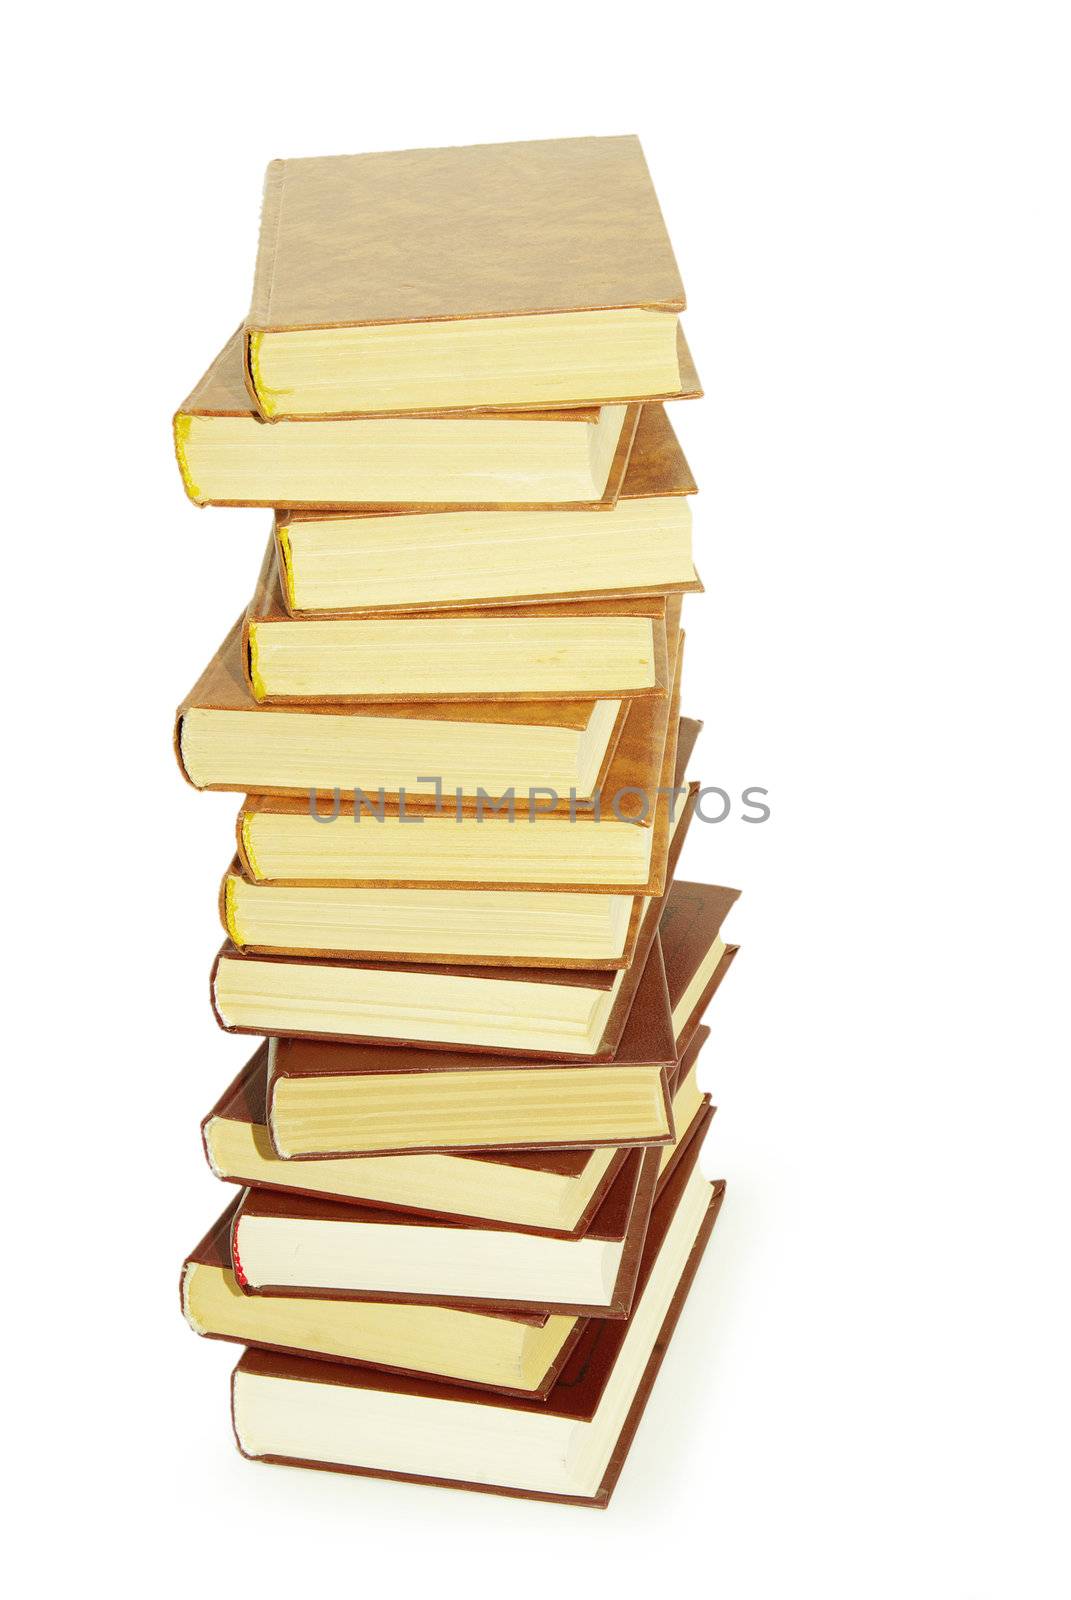  Stack of books isolated over white background